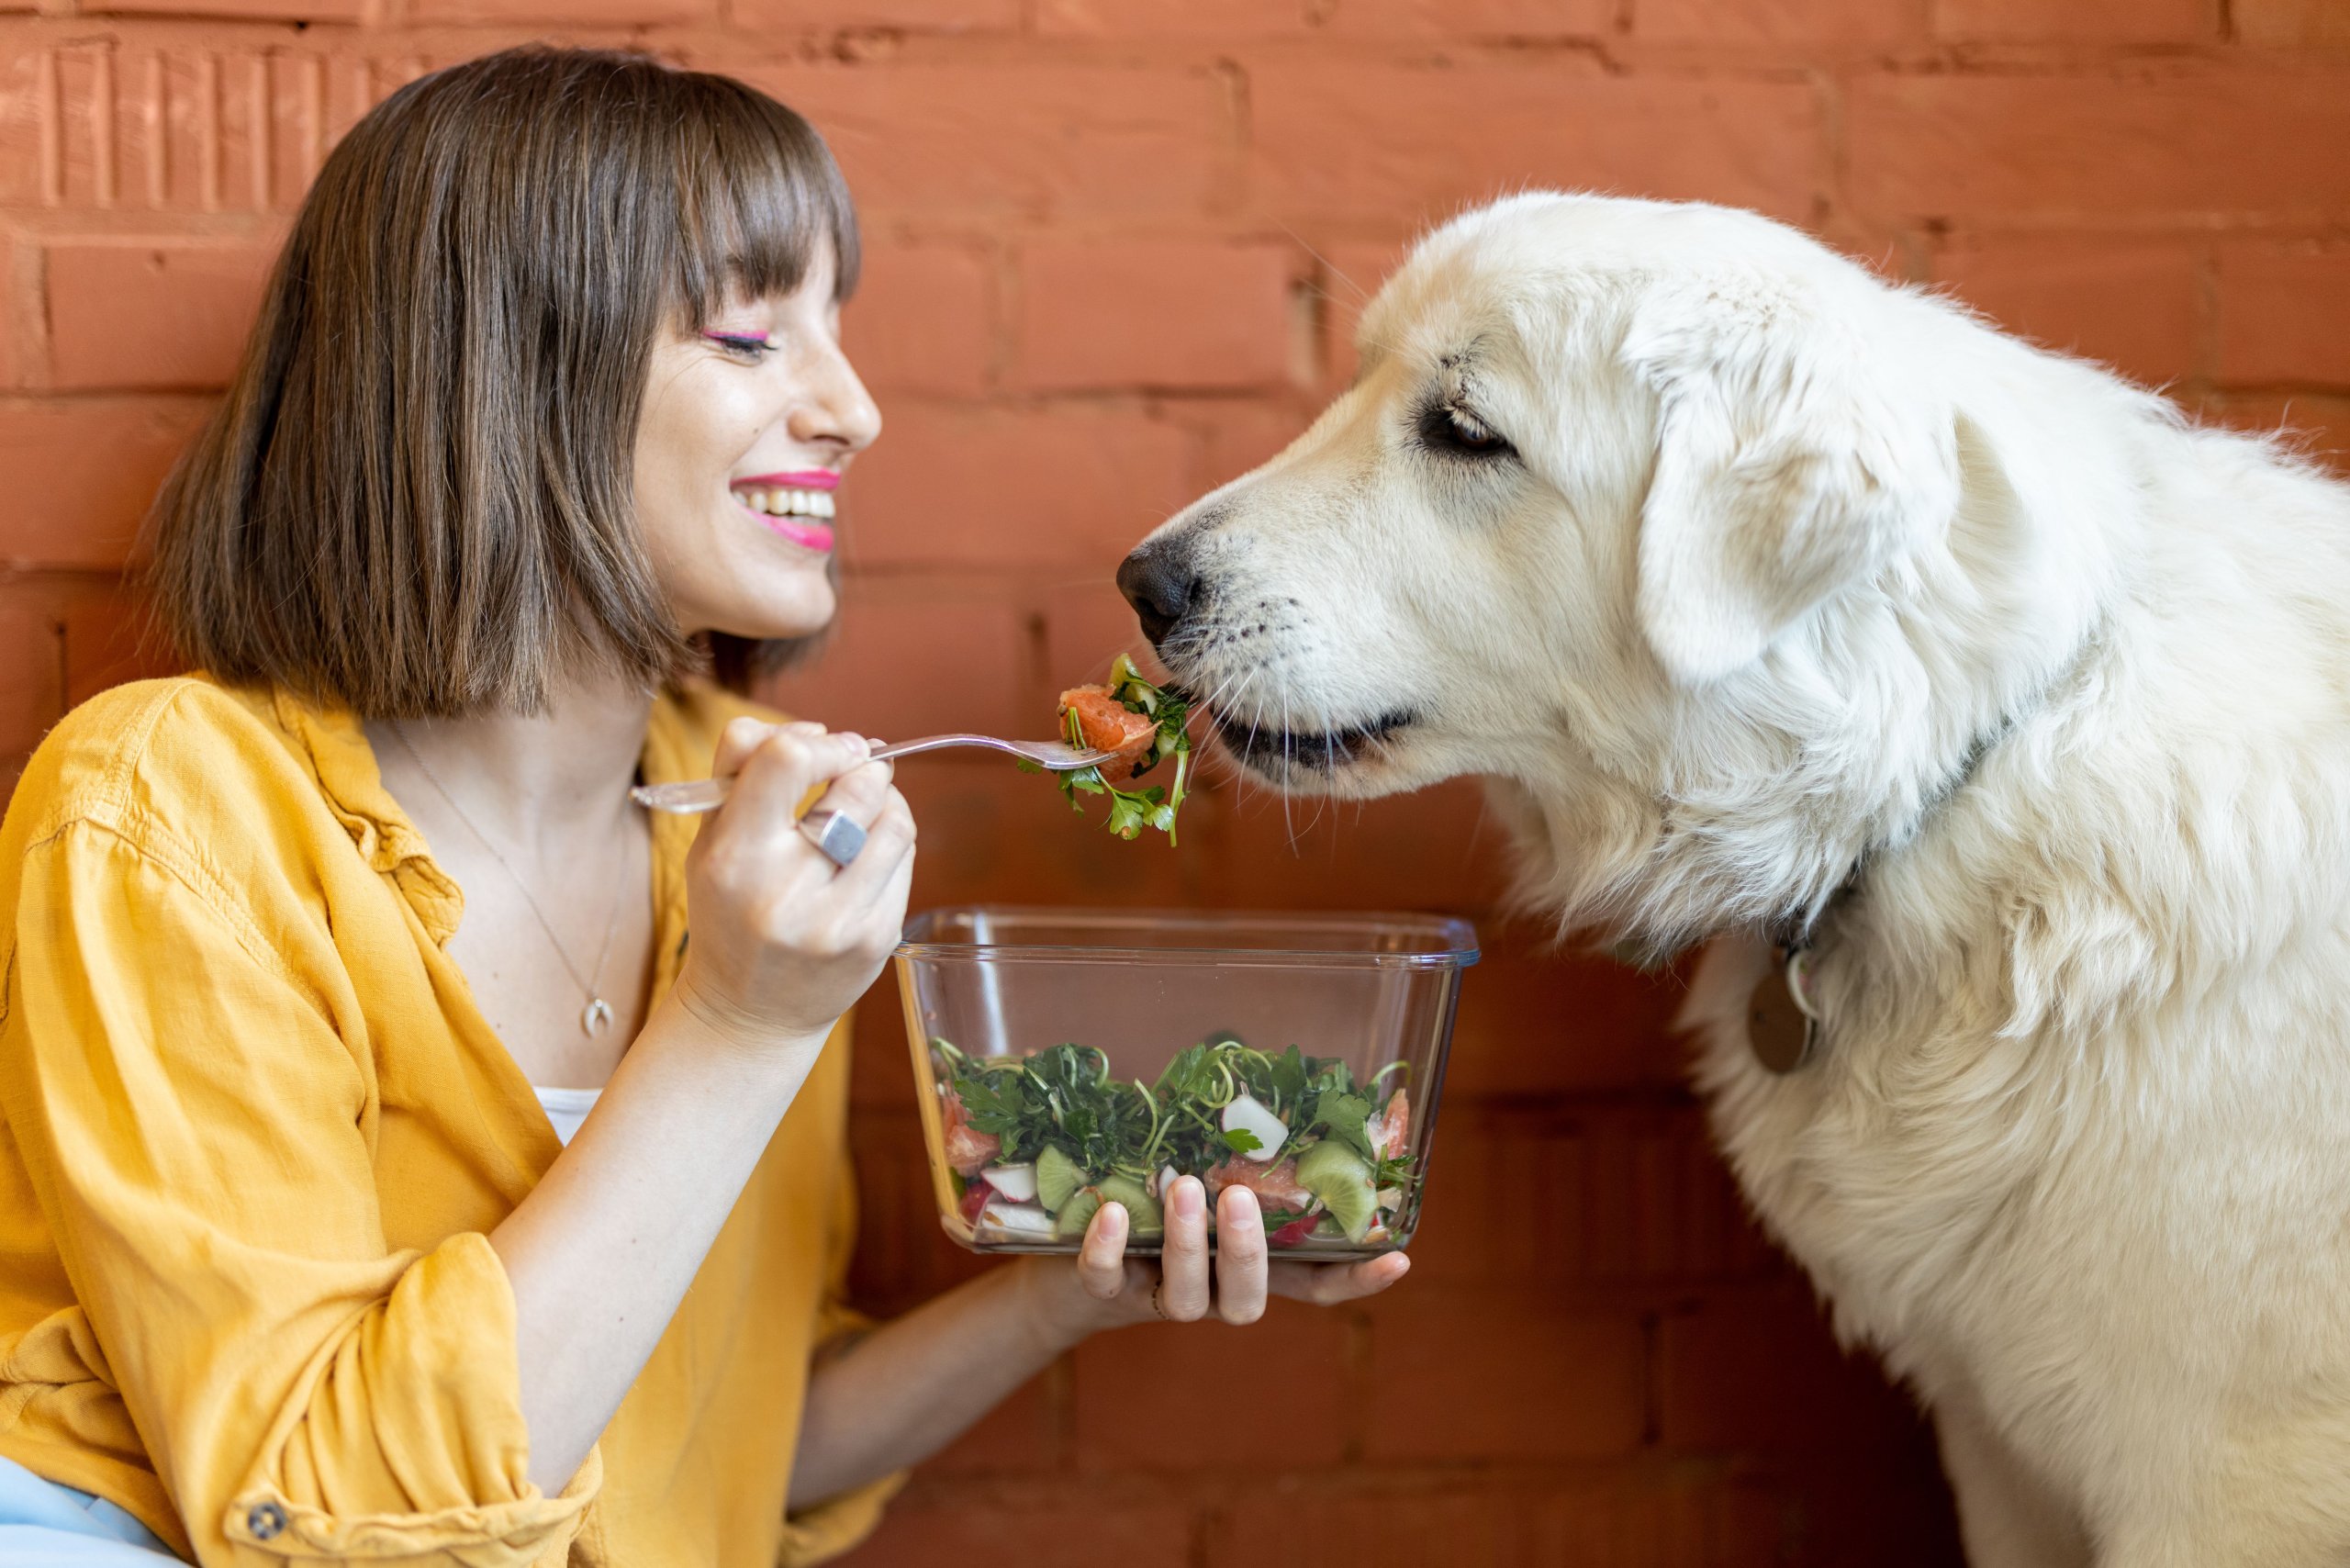 A woman named Rosemary feeding a dog a bowl of food